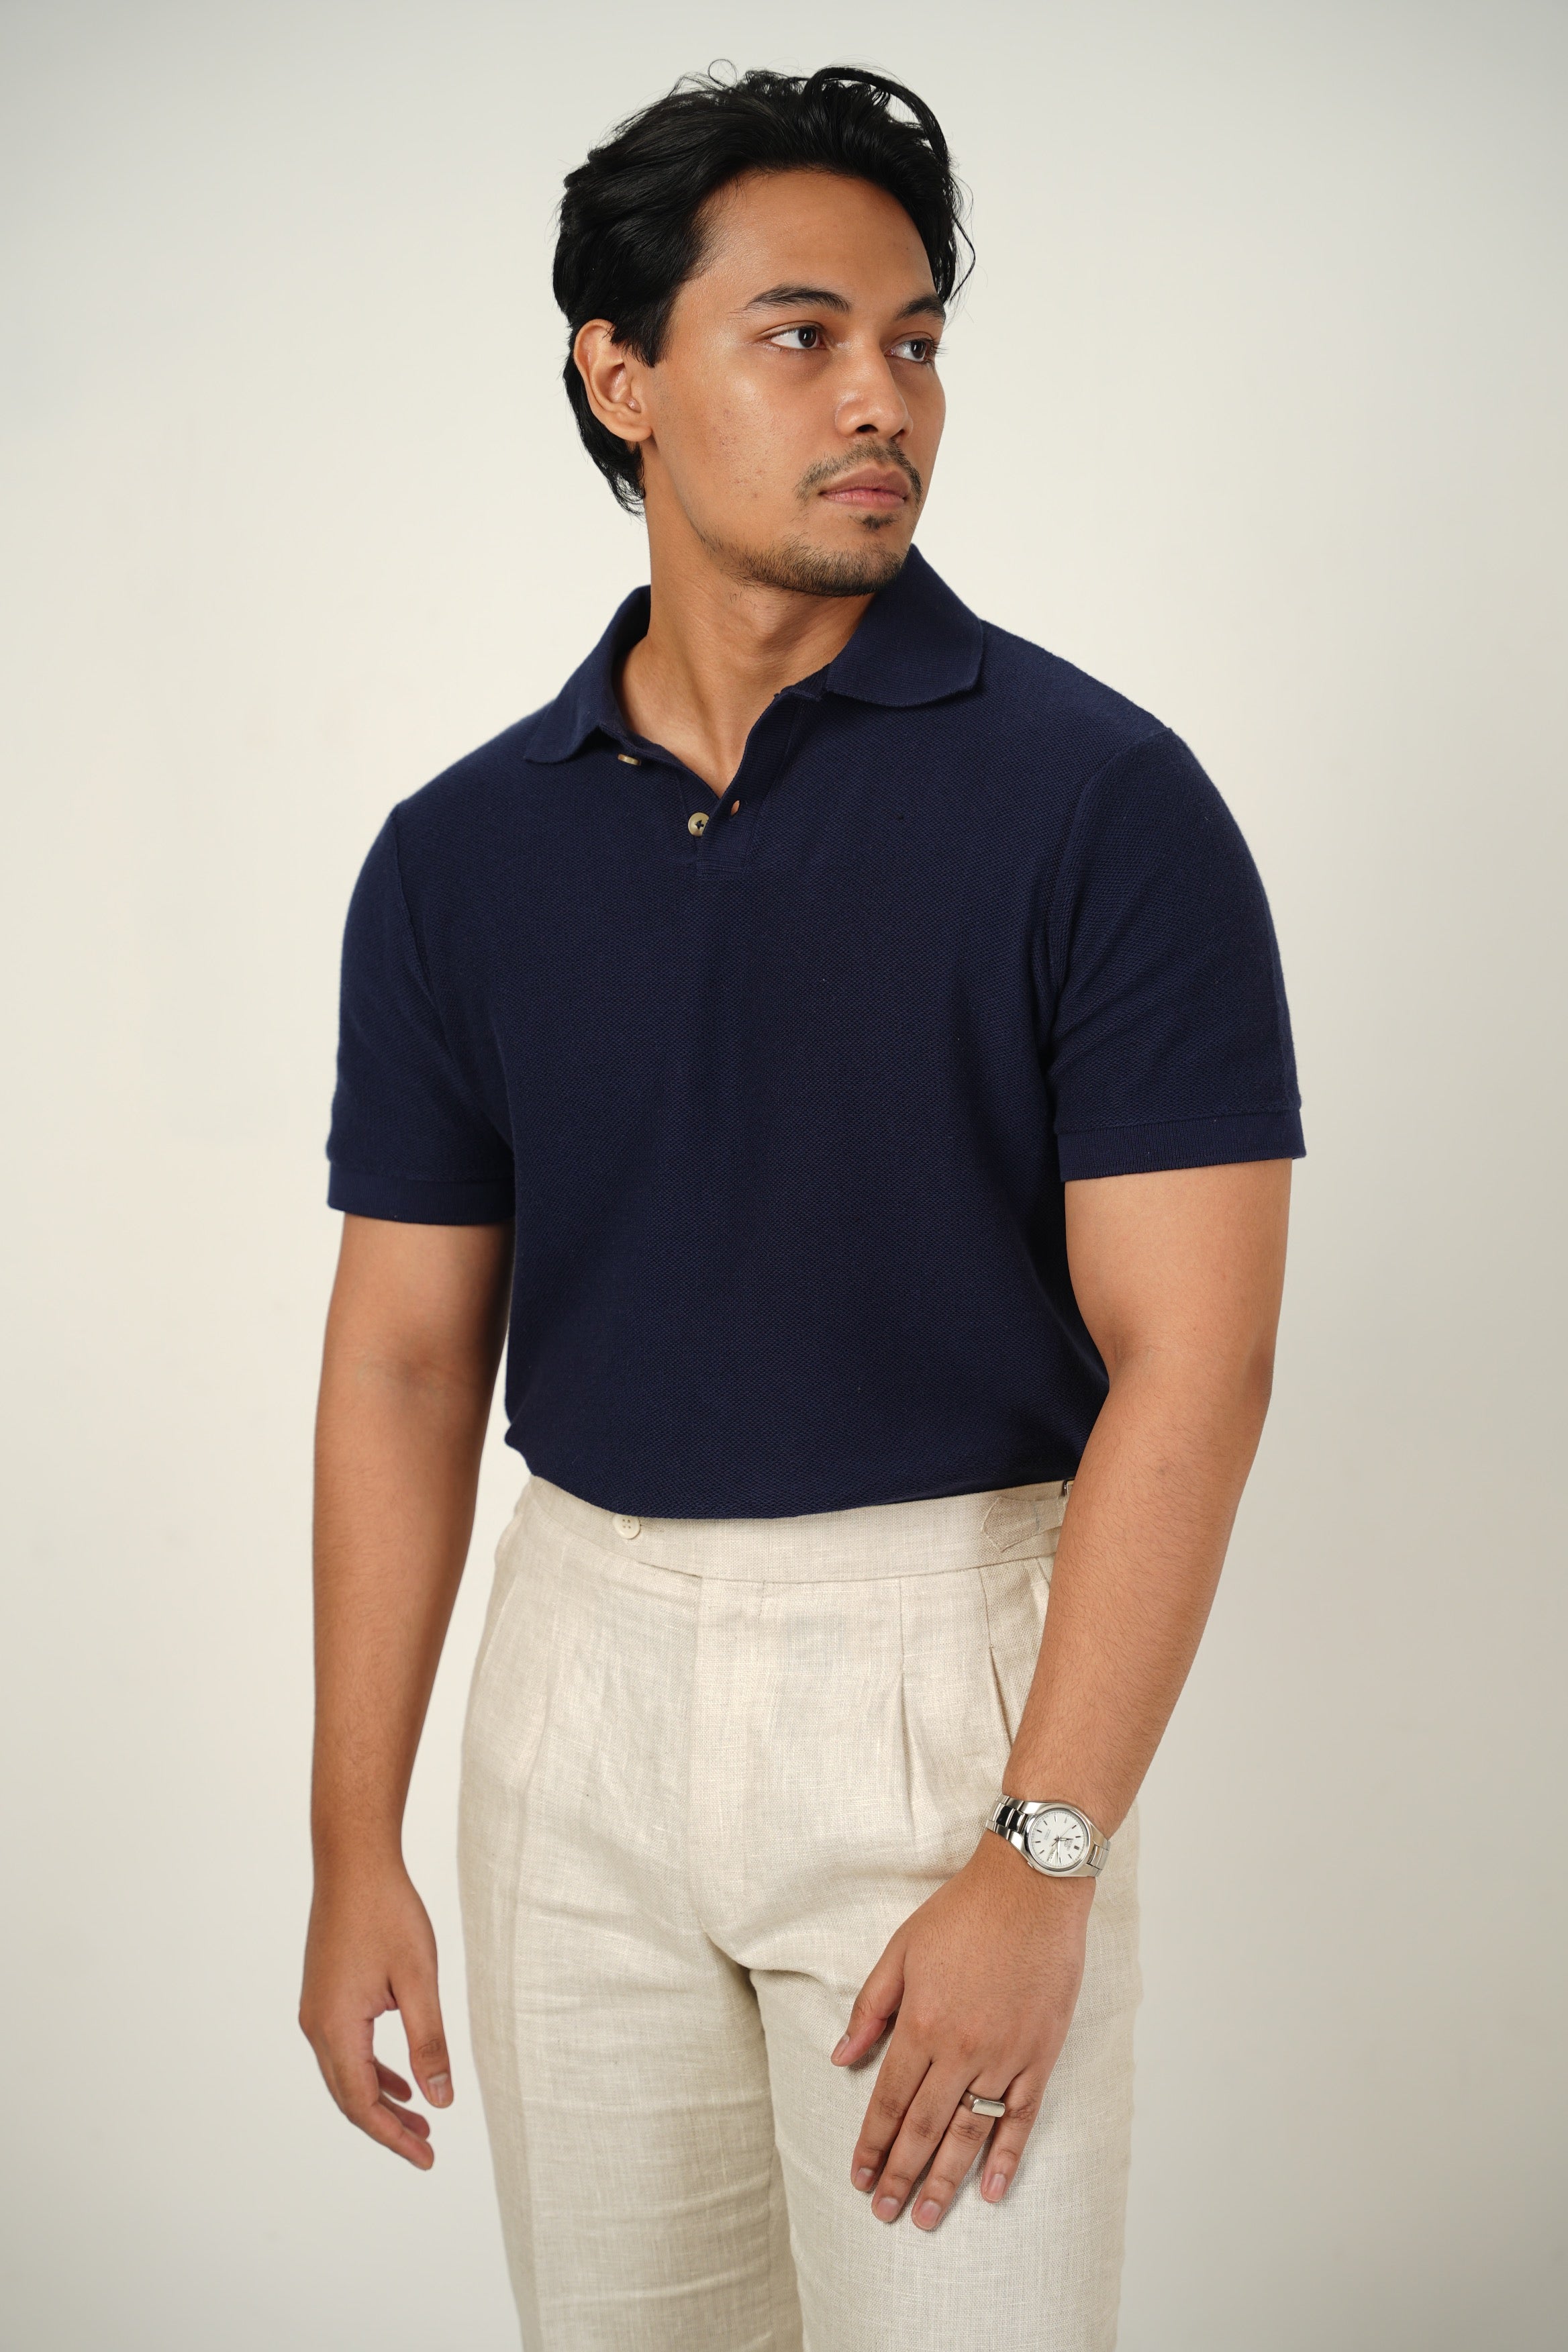 Basket Textured Luxury Knit Polo in Navy